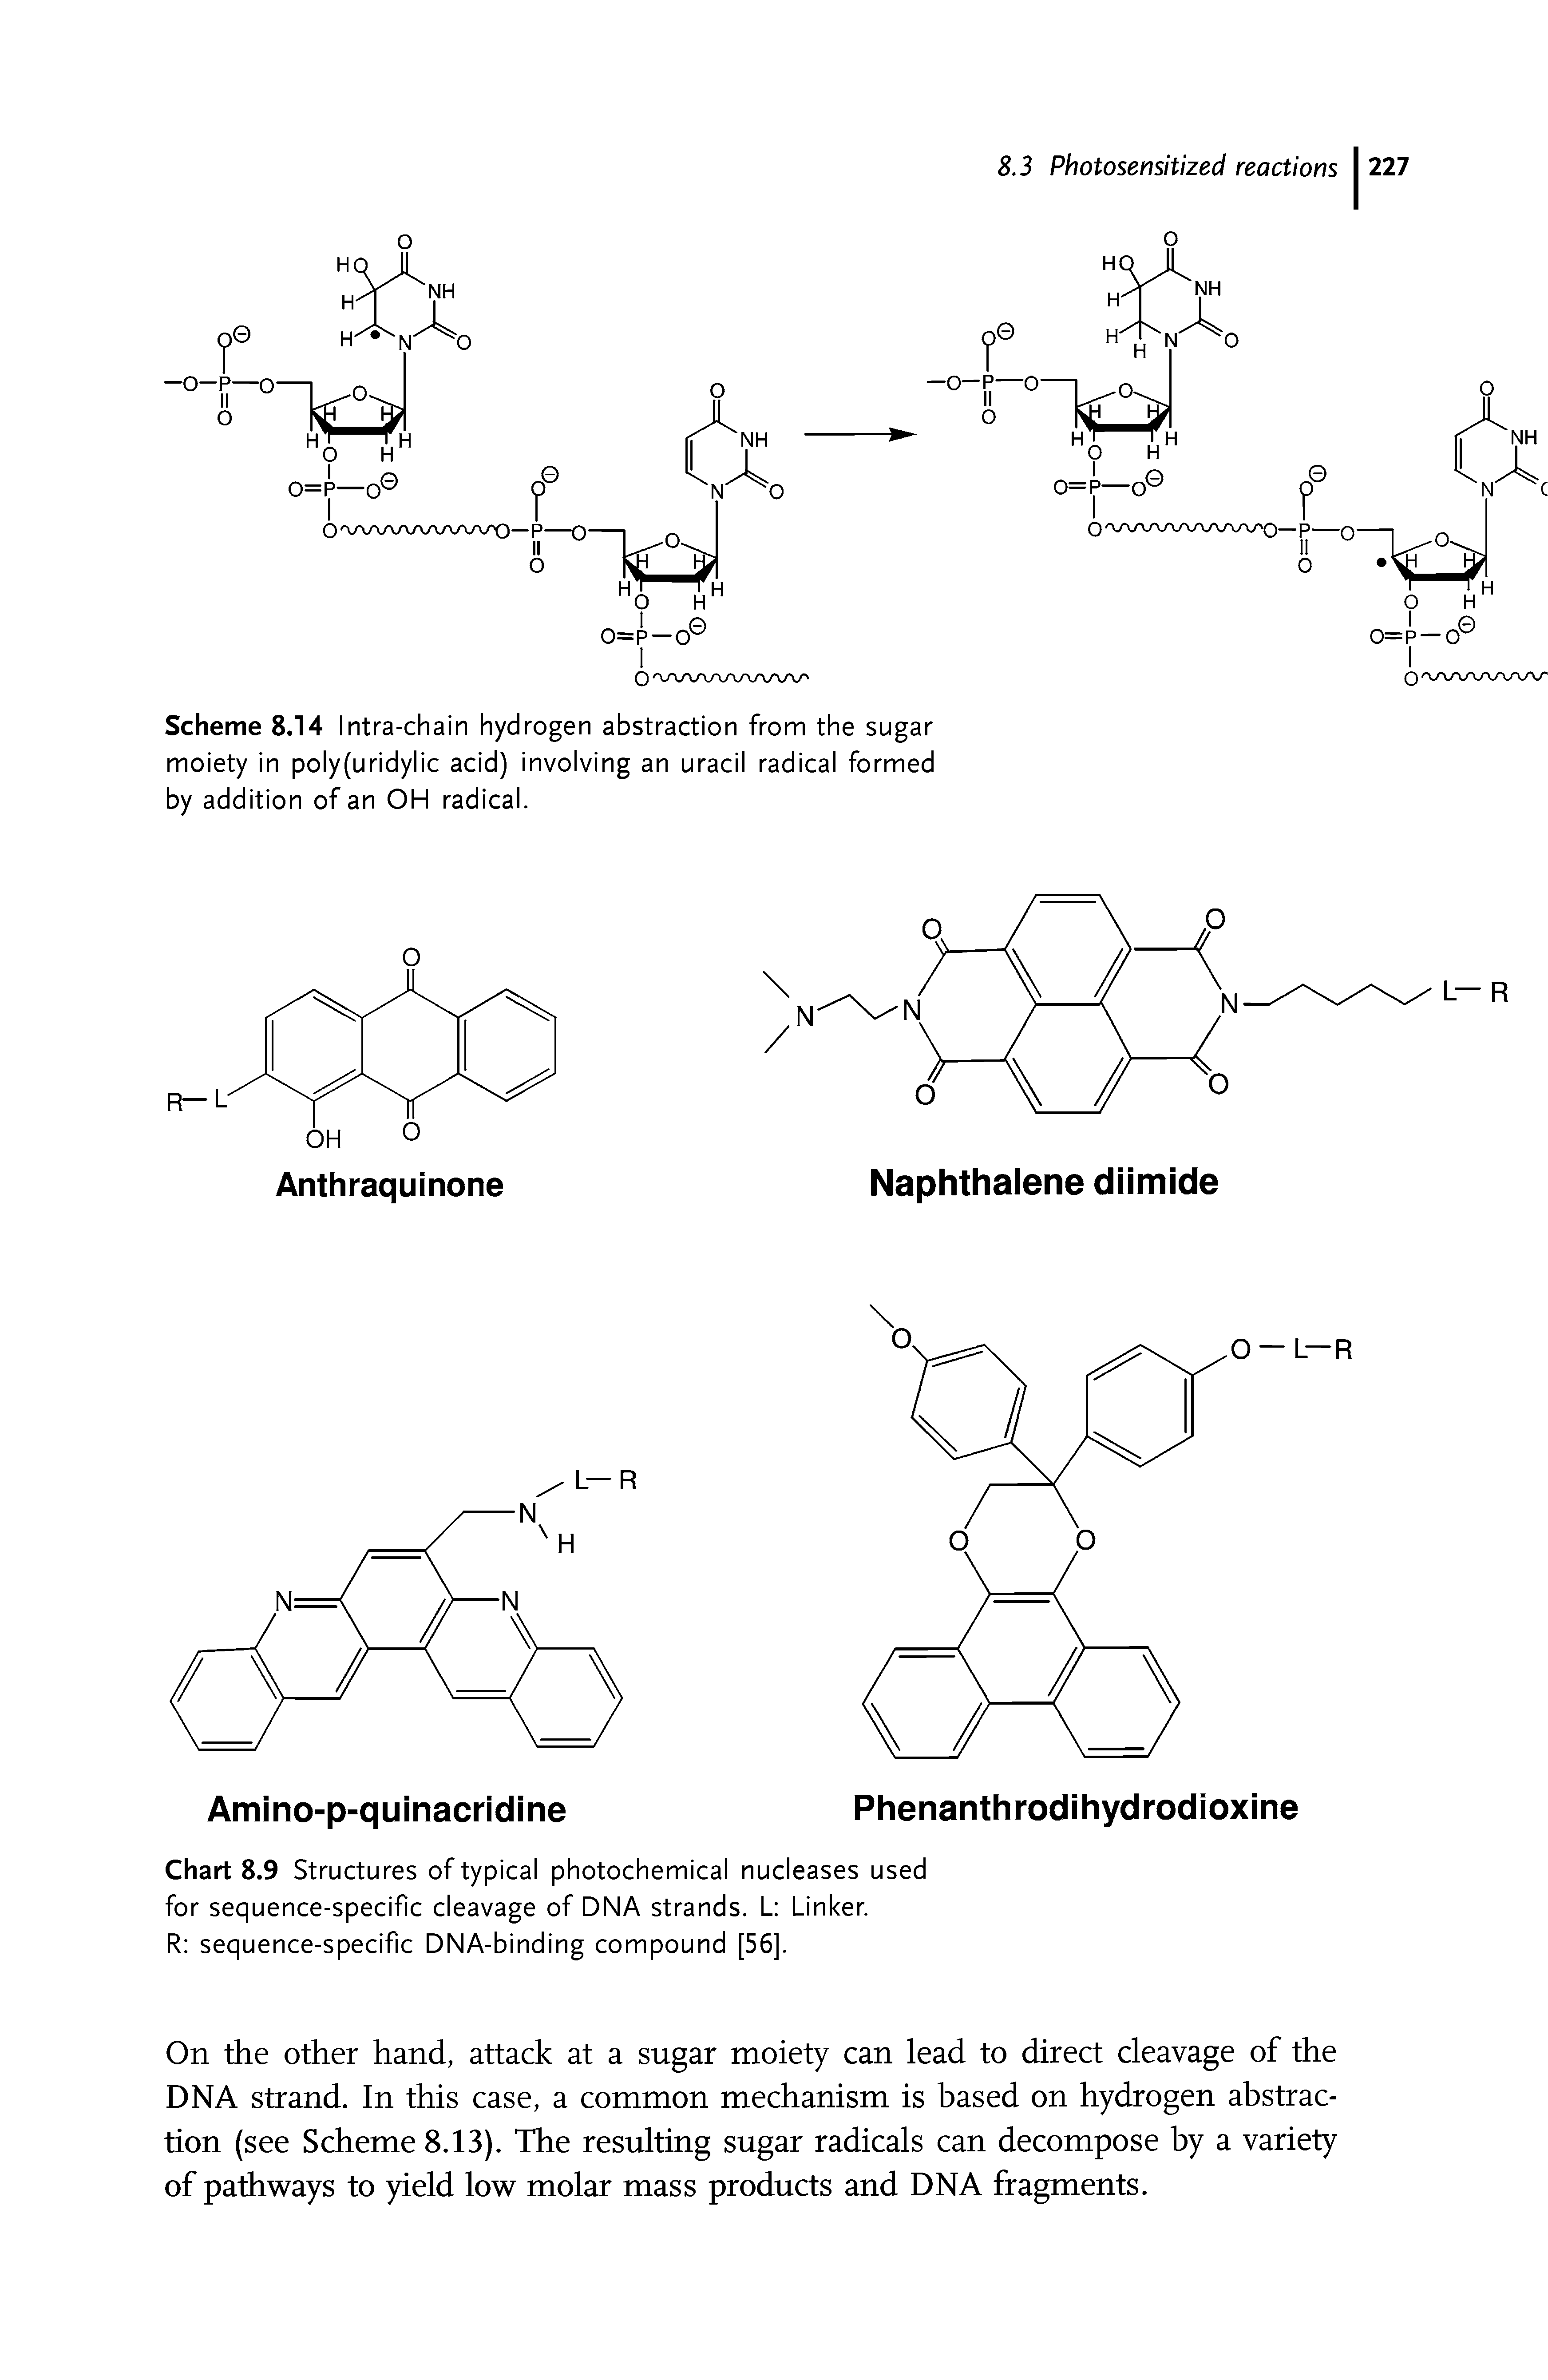 Scheme 8.14 Intra-chain hydrogen abstraction from the sugar moiety in poly(uridylic acid) involving an uracil radical formed by addition of an OH radical.